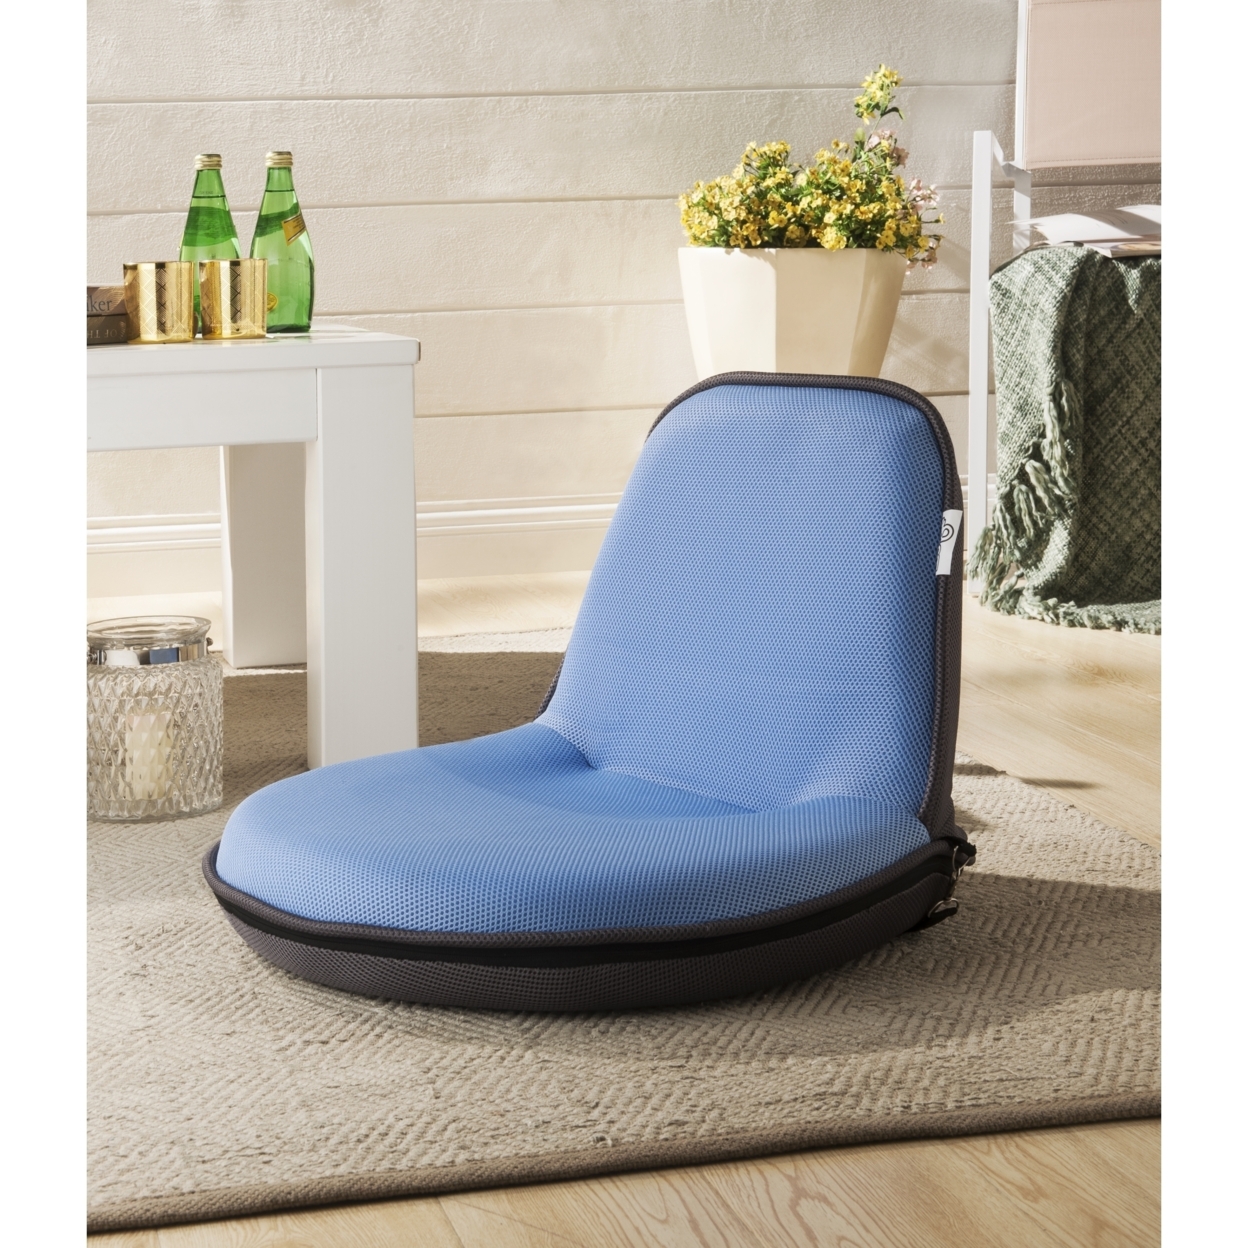 Loungie Quickchair Mesh Floor Chair-Foldable-Portable With Strap-Indoor-Outdoor-by Inspired Home - Light Blue/grey